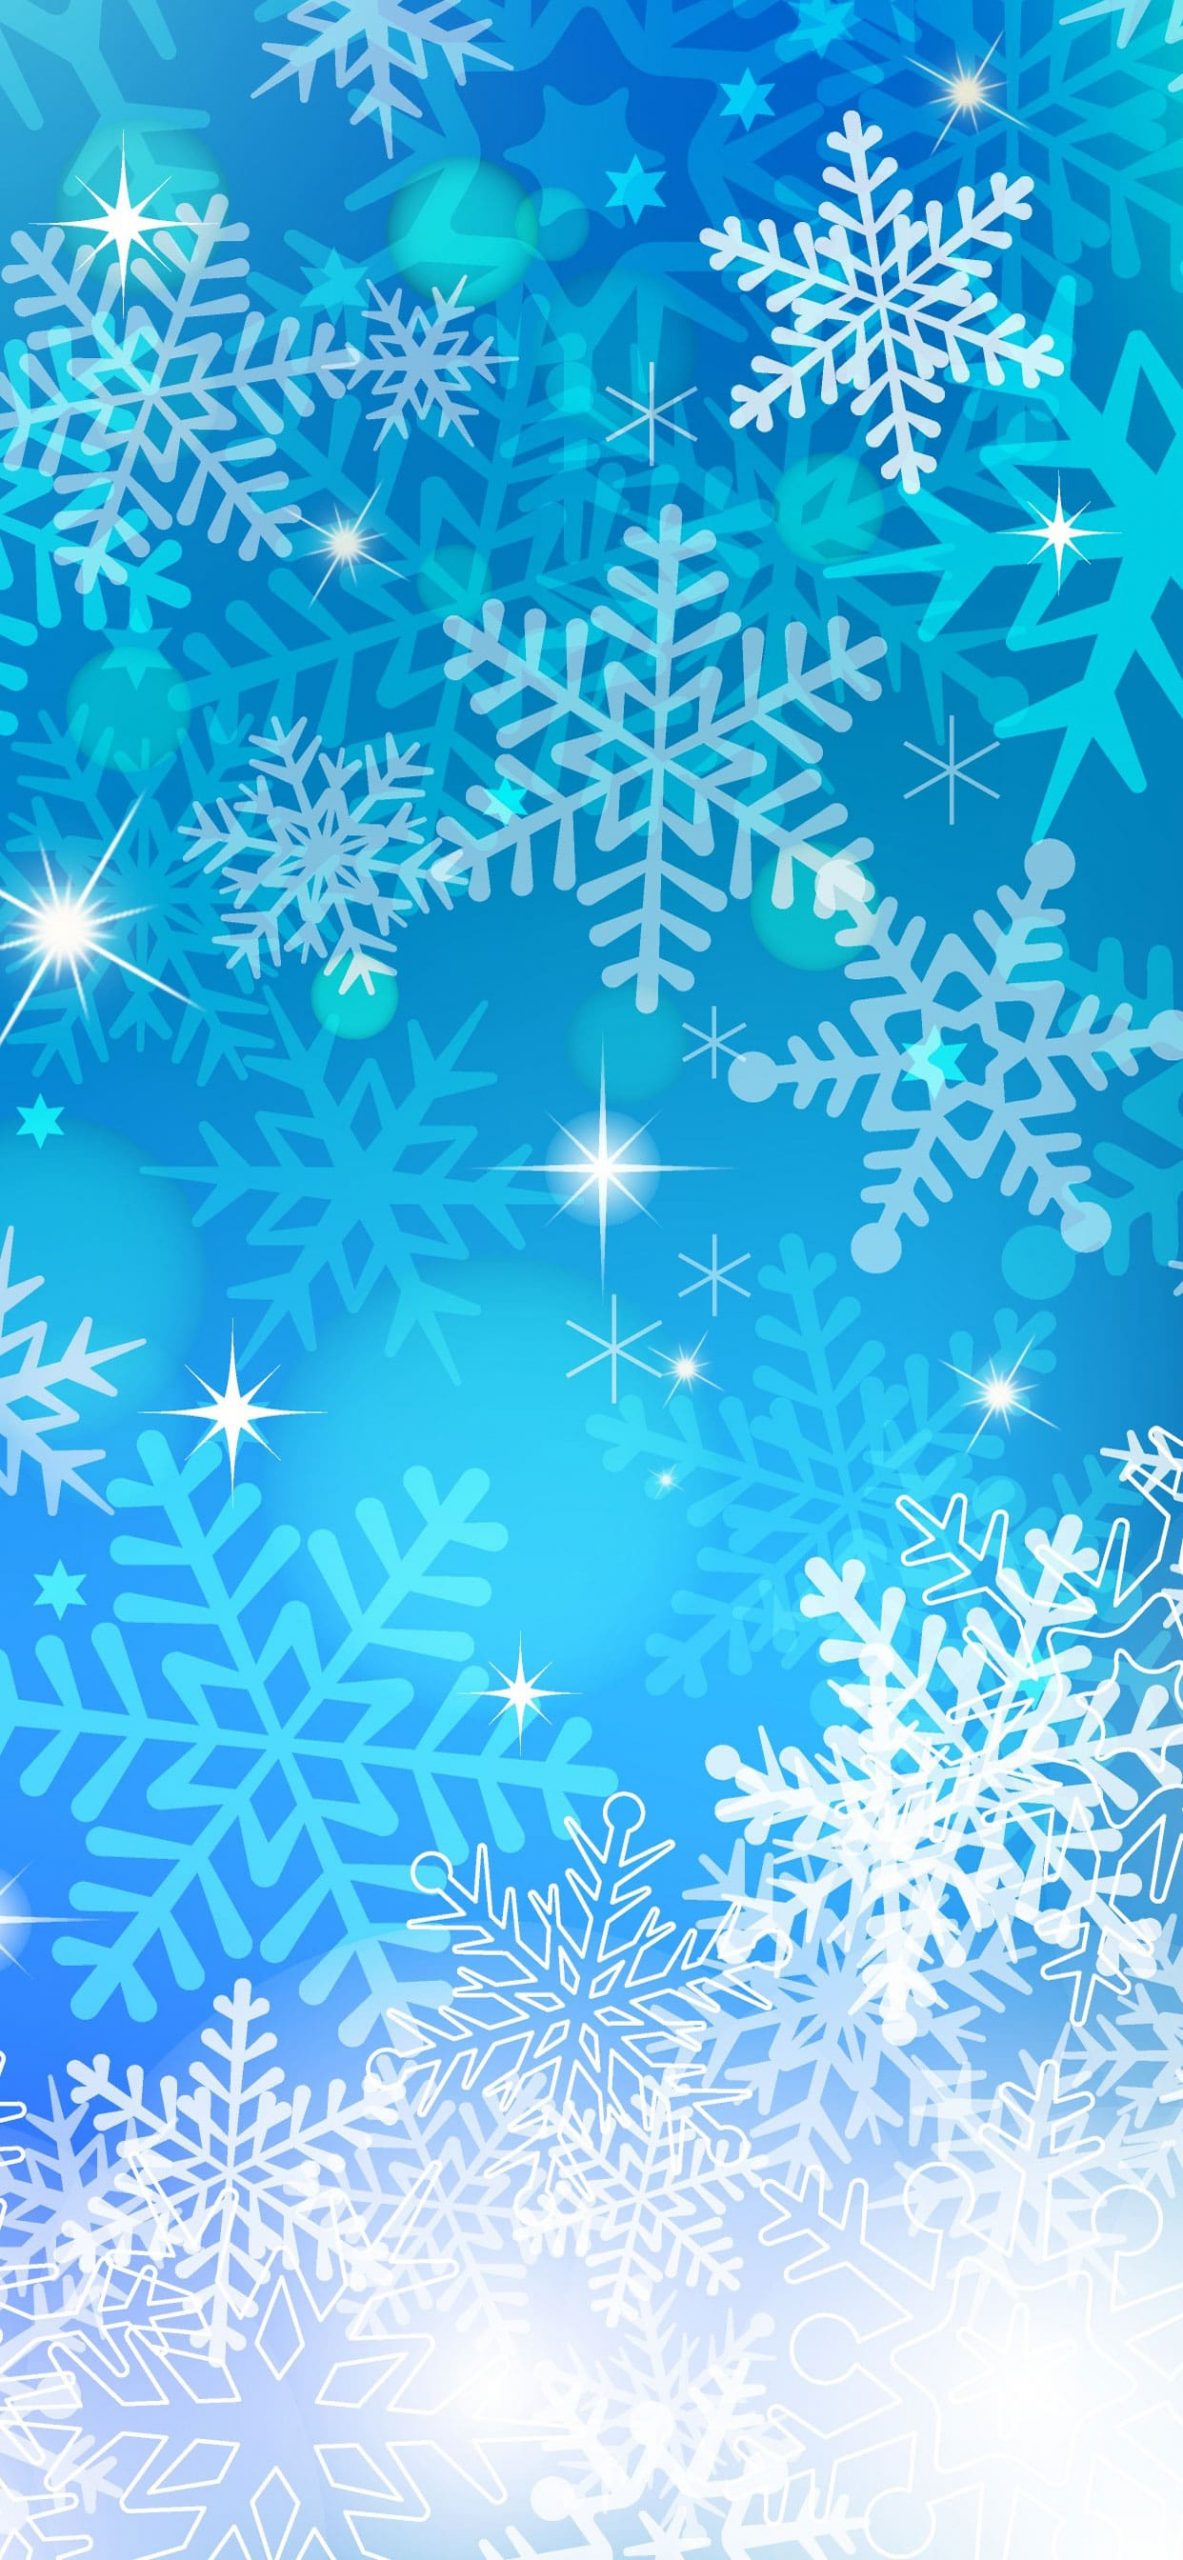 3,000+ of the Best Snowflake Images for Free - Pixabay